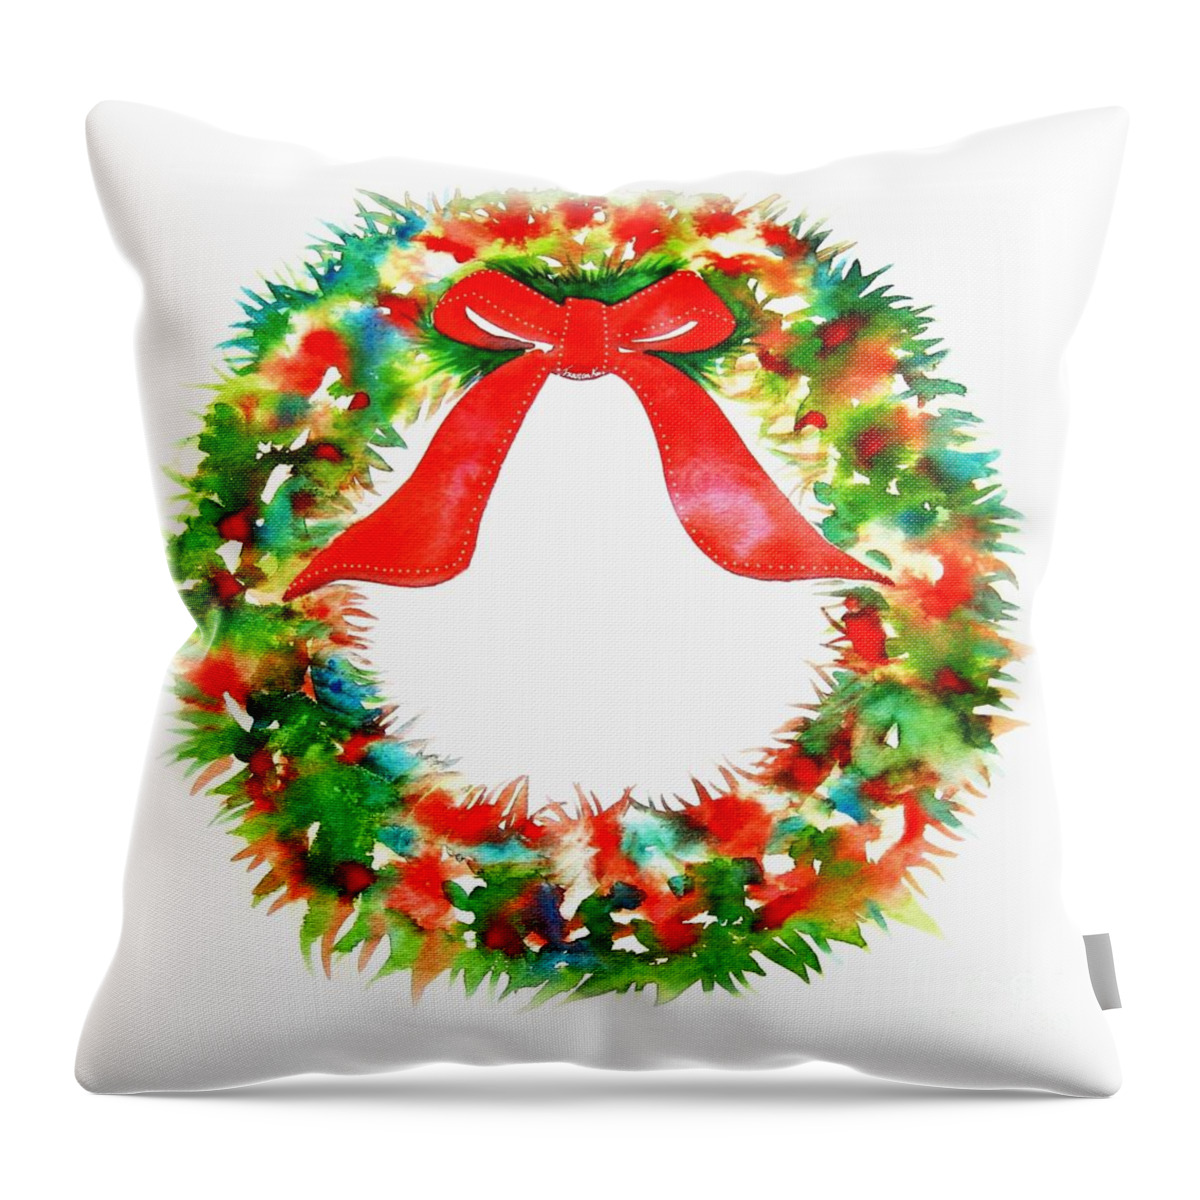 Beautiful Throw Pillow featuring the painting Watercolor Wreath by Frances Ku